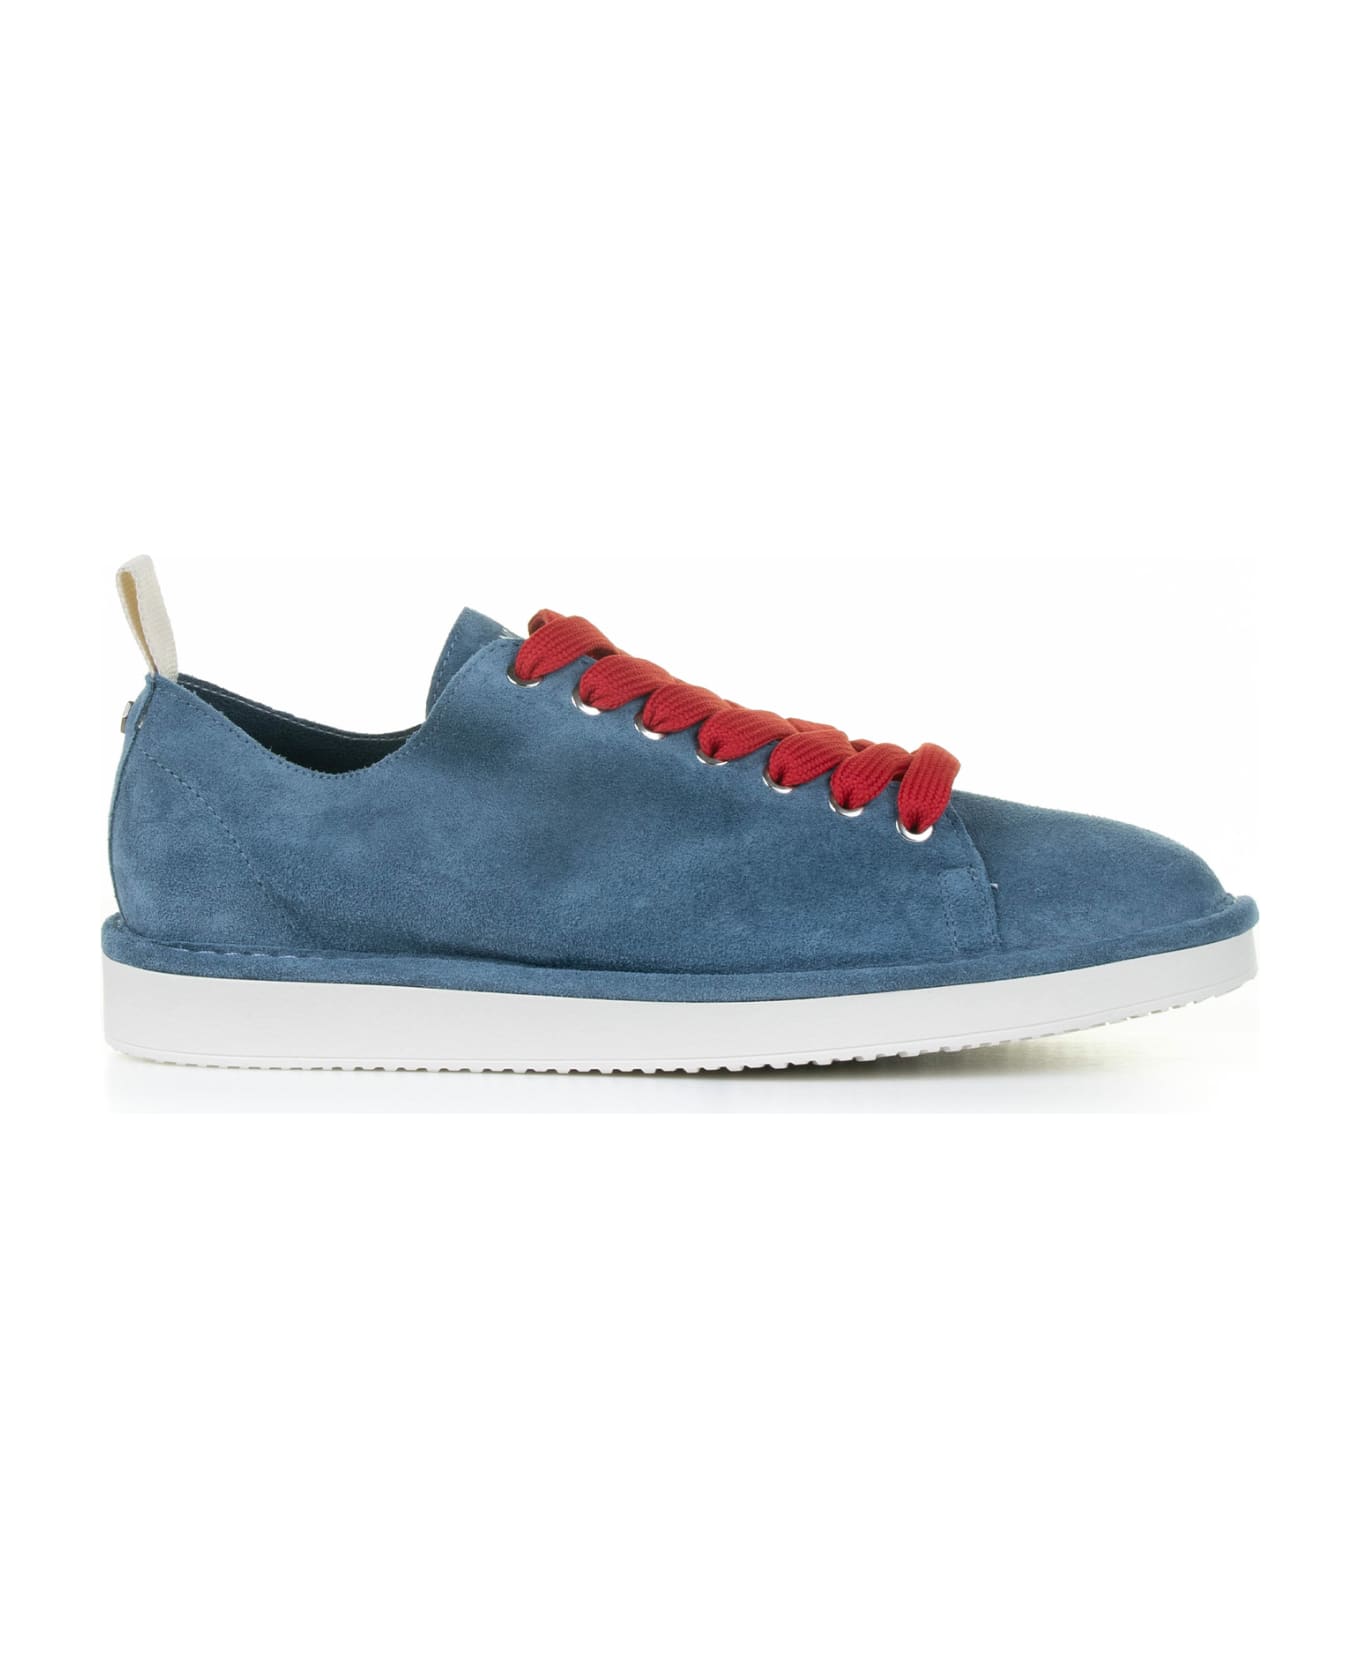 Panchic Sneaker In Blue Suede - BASIC BLUE- RED スニーカー